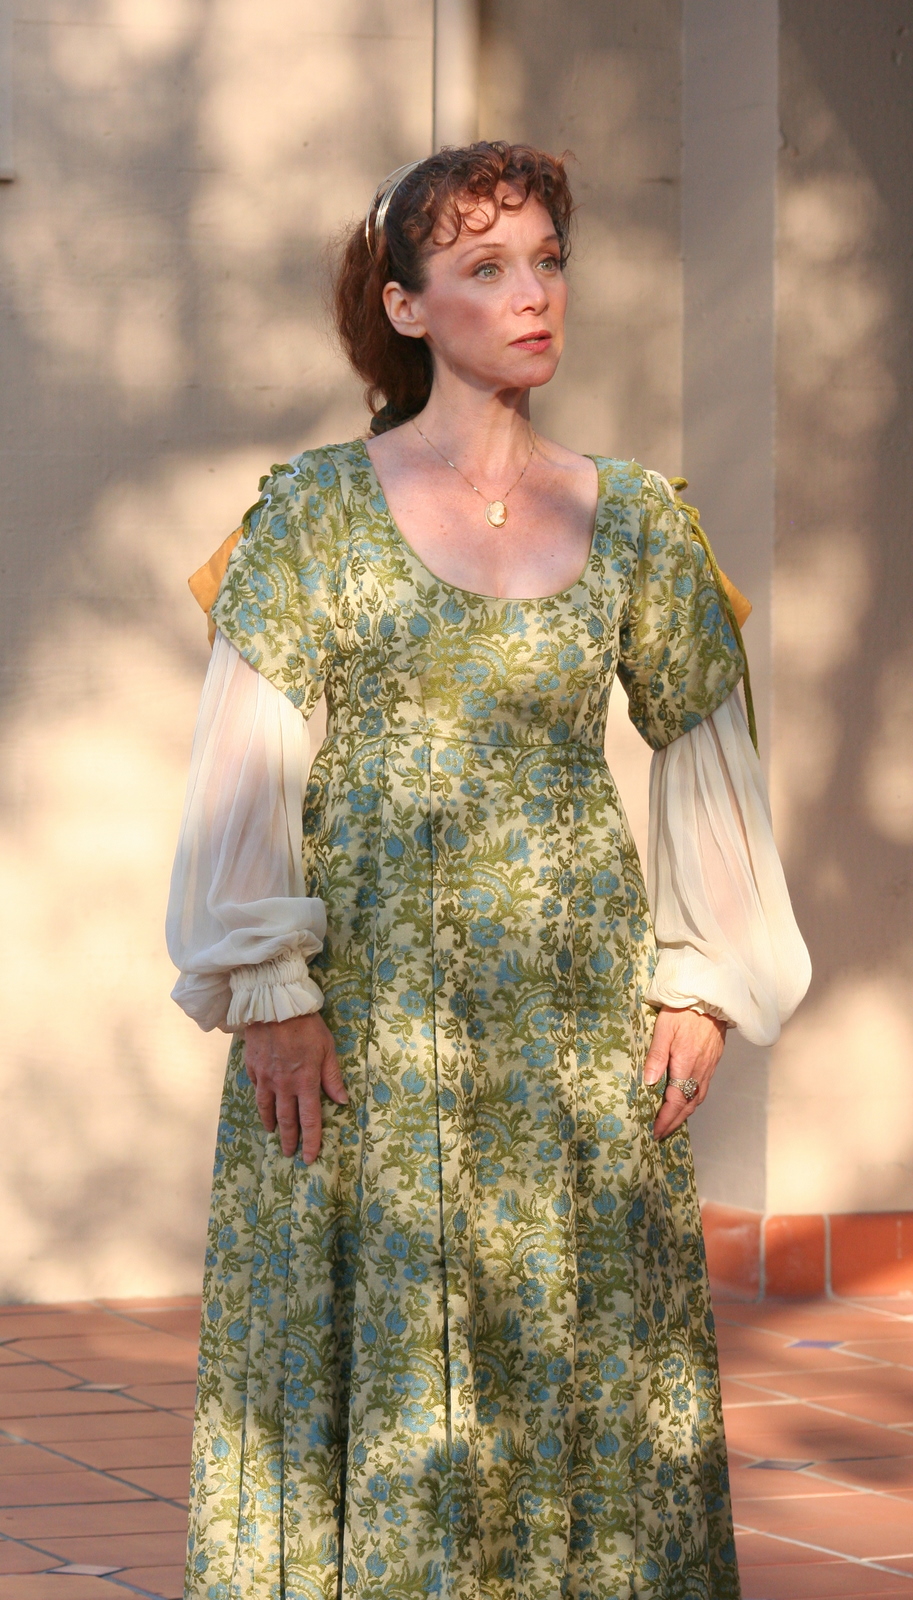 'Olivia' Twelfth Night Directed by Armin Shimerman West Hollywood Shakespeare in the Park